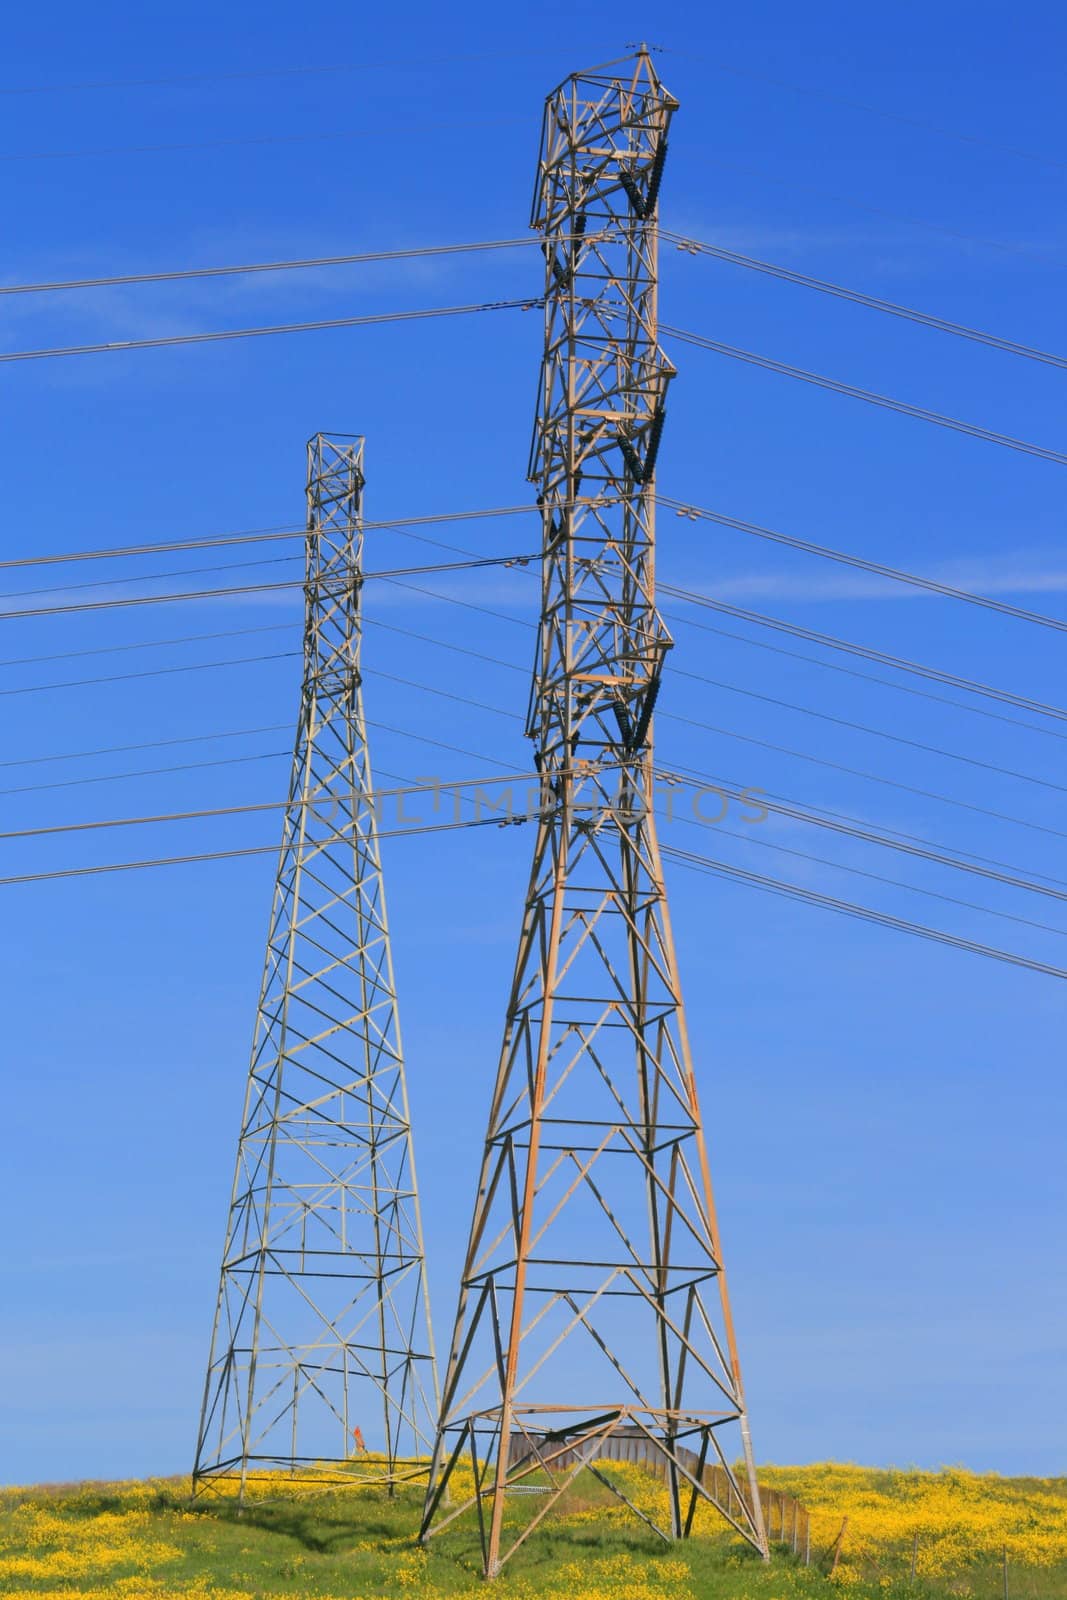 Two electricity pylons on a hill over clear blue sky.
